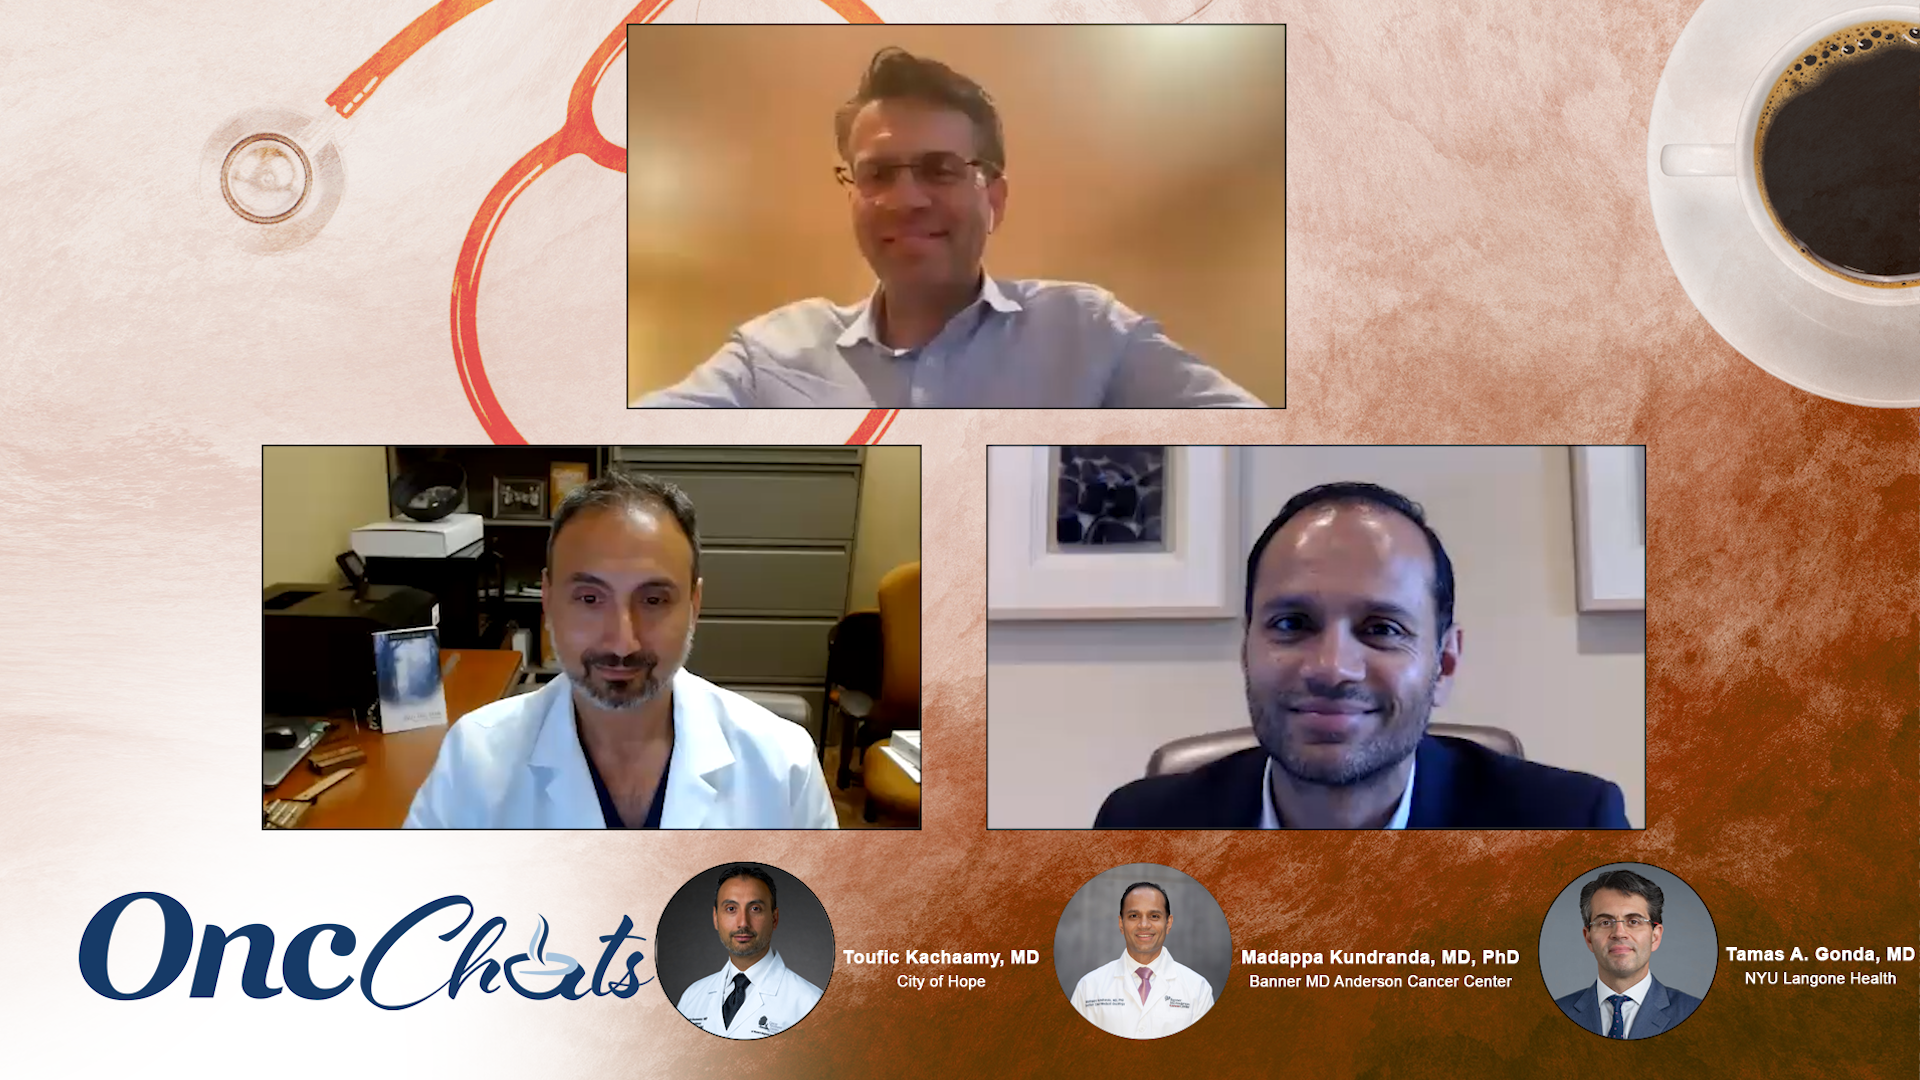 In this series of OncChats: Leveraging Endoscopic Ultrasound in Pancreatic Cancer, Toufic A. Kachaamy, MD, of City of Hope, Madappa Kundranda, MD, PhD, of Banner MD Anderson Cancer Center, and Tamas A. Gonda, MD, of NYU Langone, discuss the evolving role of endoscopic ultrasound  in the realm of pancreatic cancer.